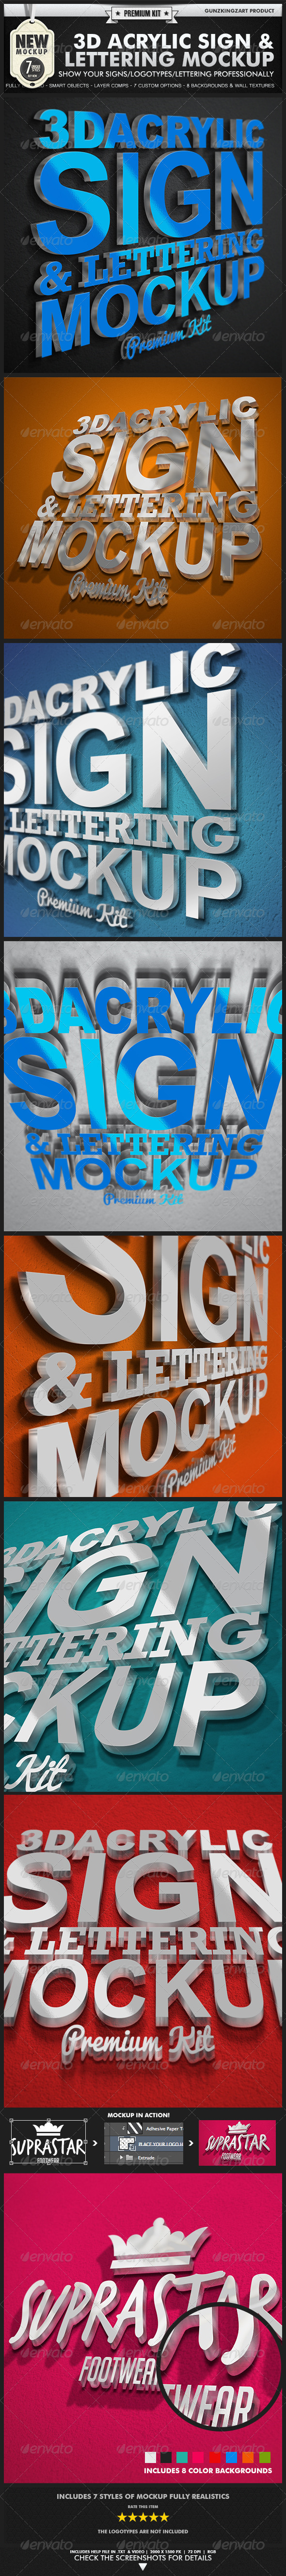 Download Acrylic Mockup Graphics Designs Templates From Graphicriver